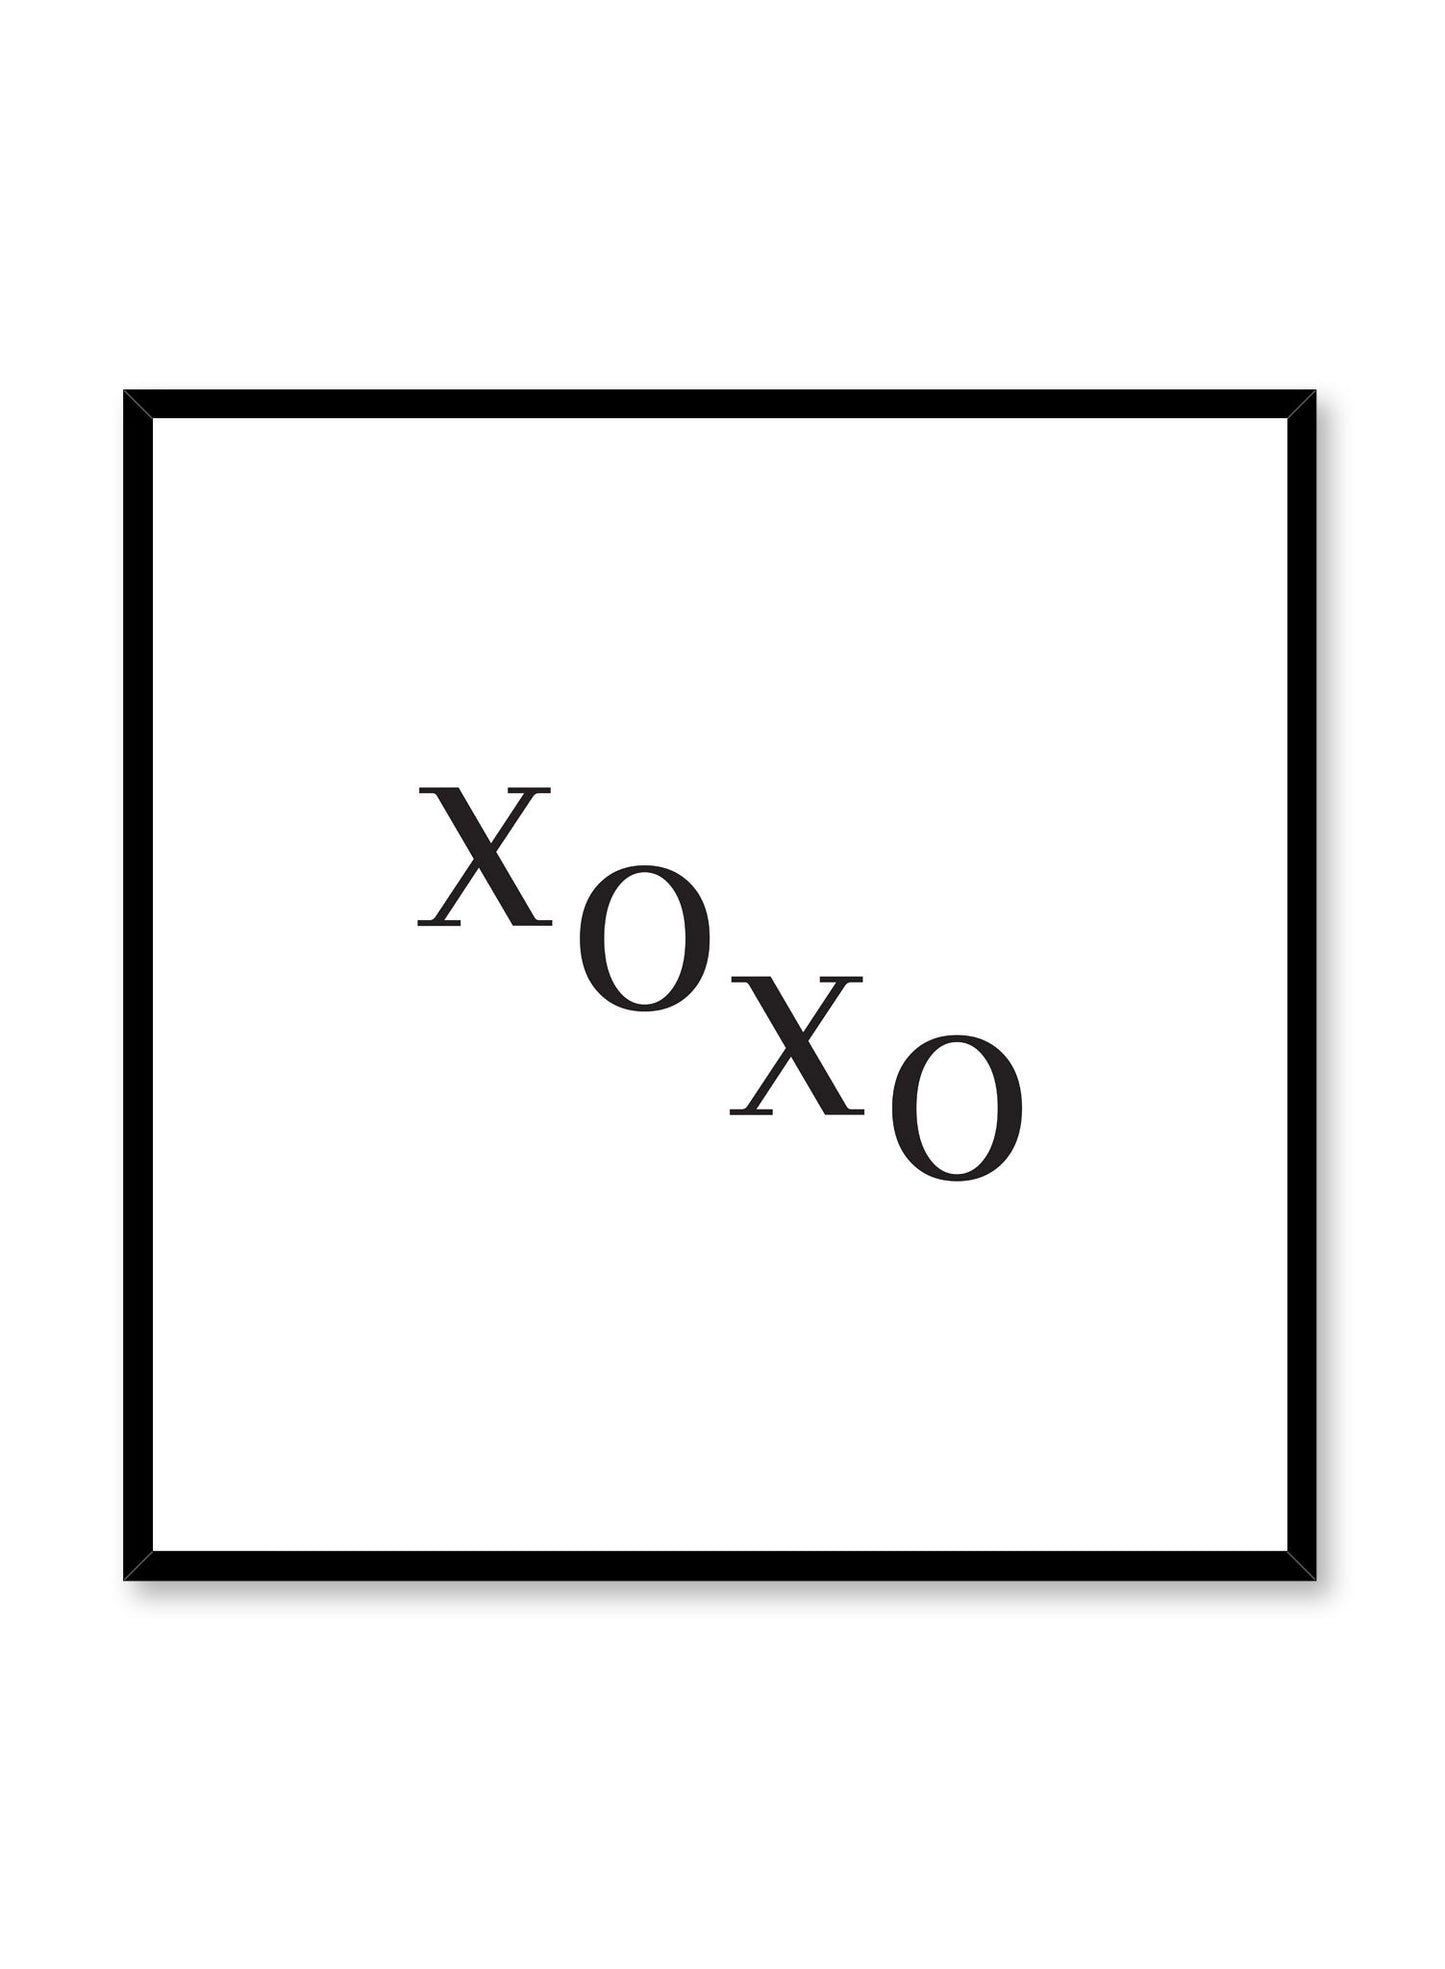 Scandinavian poster with black and white graphic typography design of XOXO text by Opposite Wall